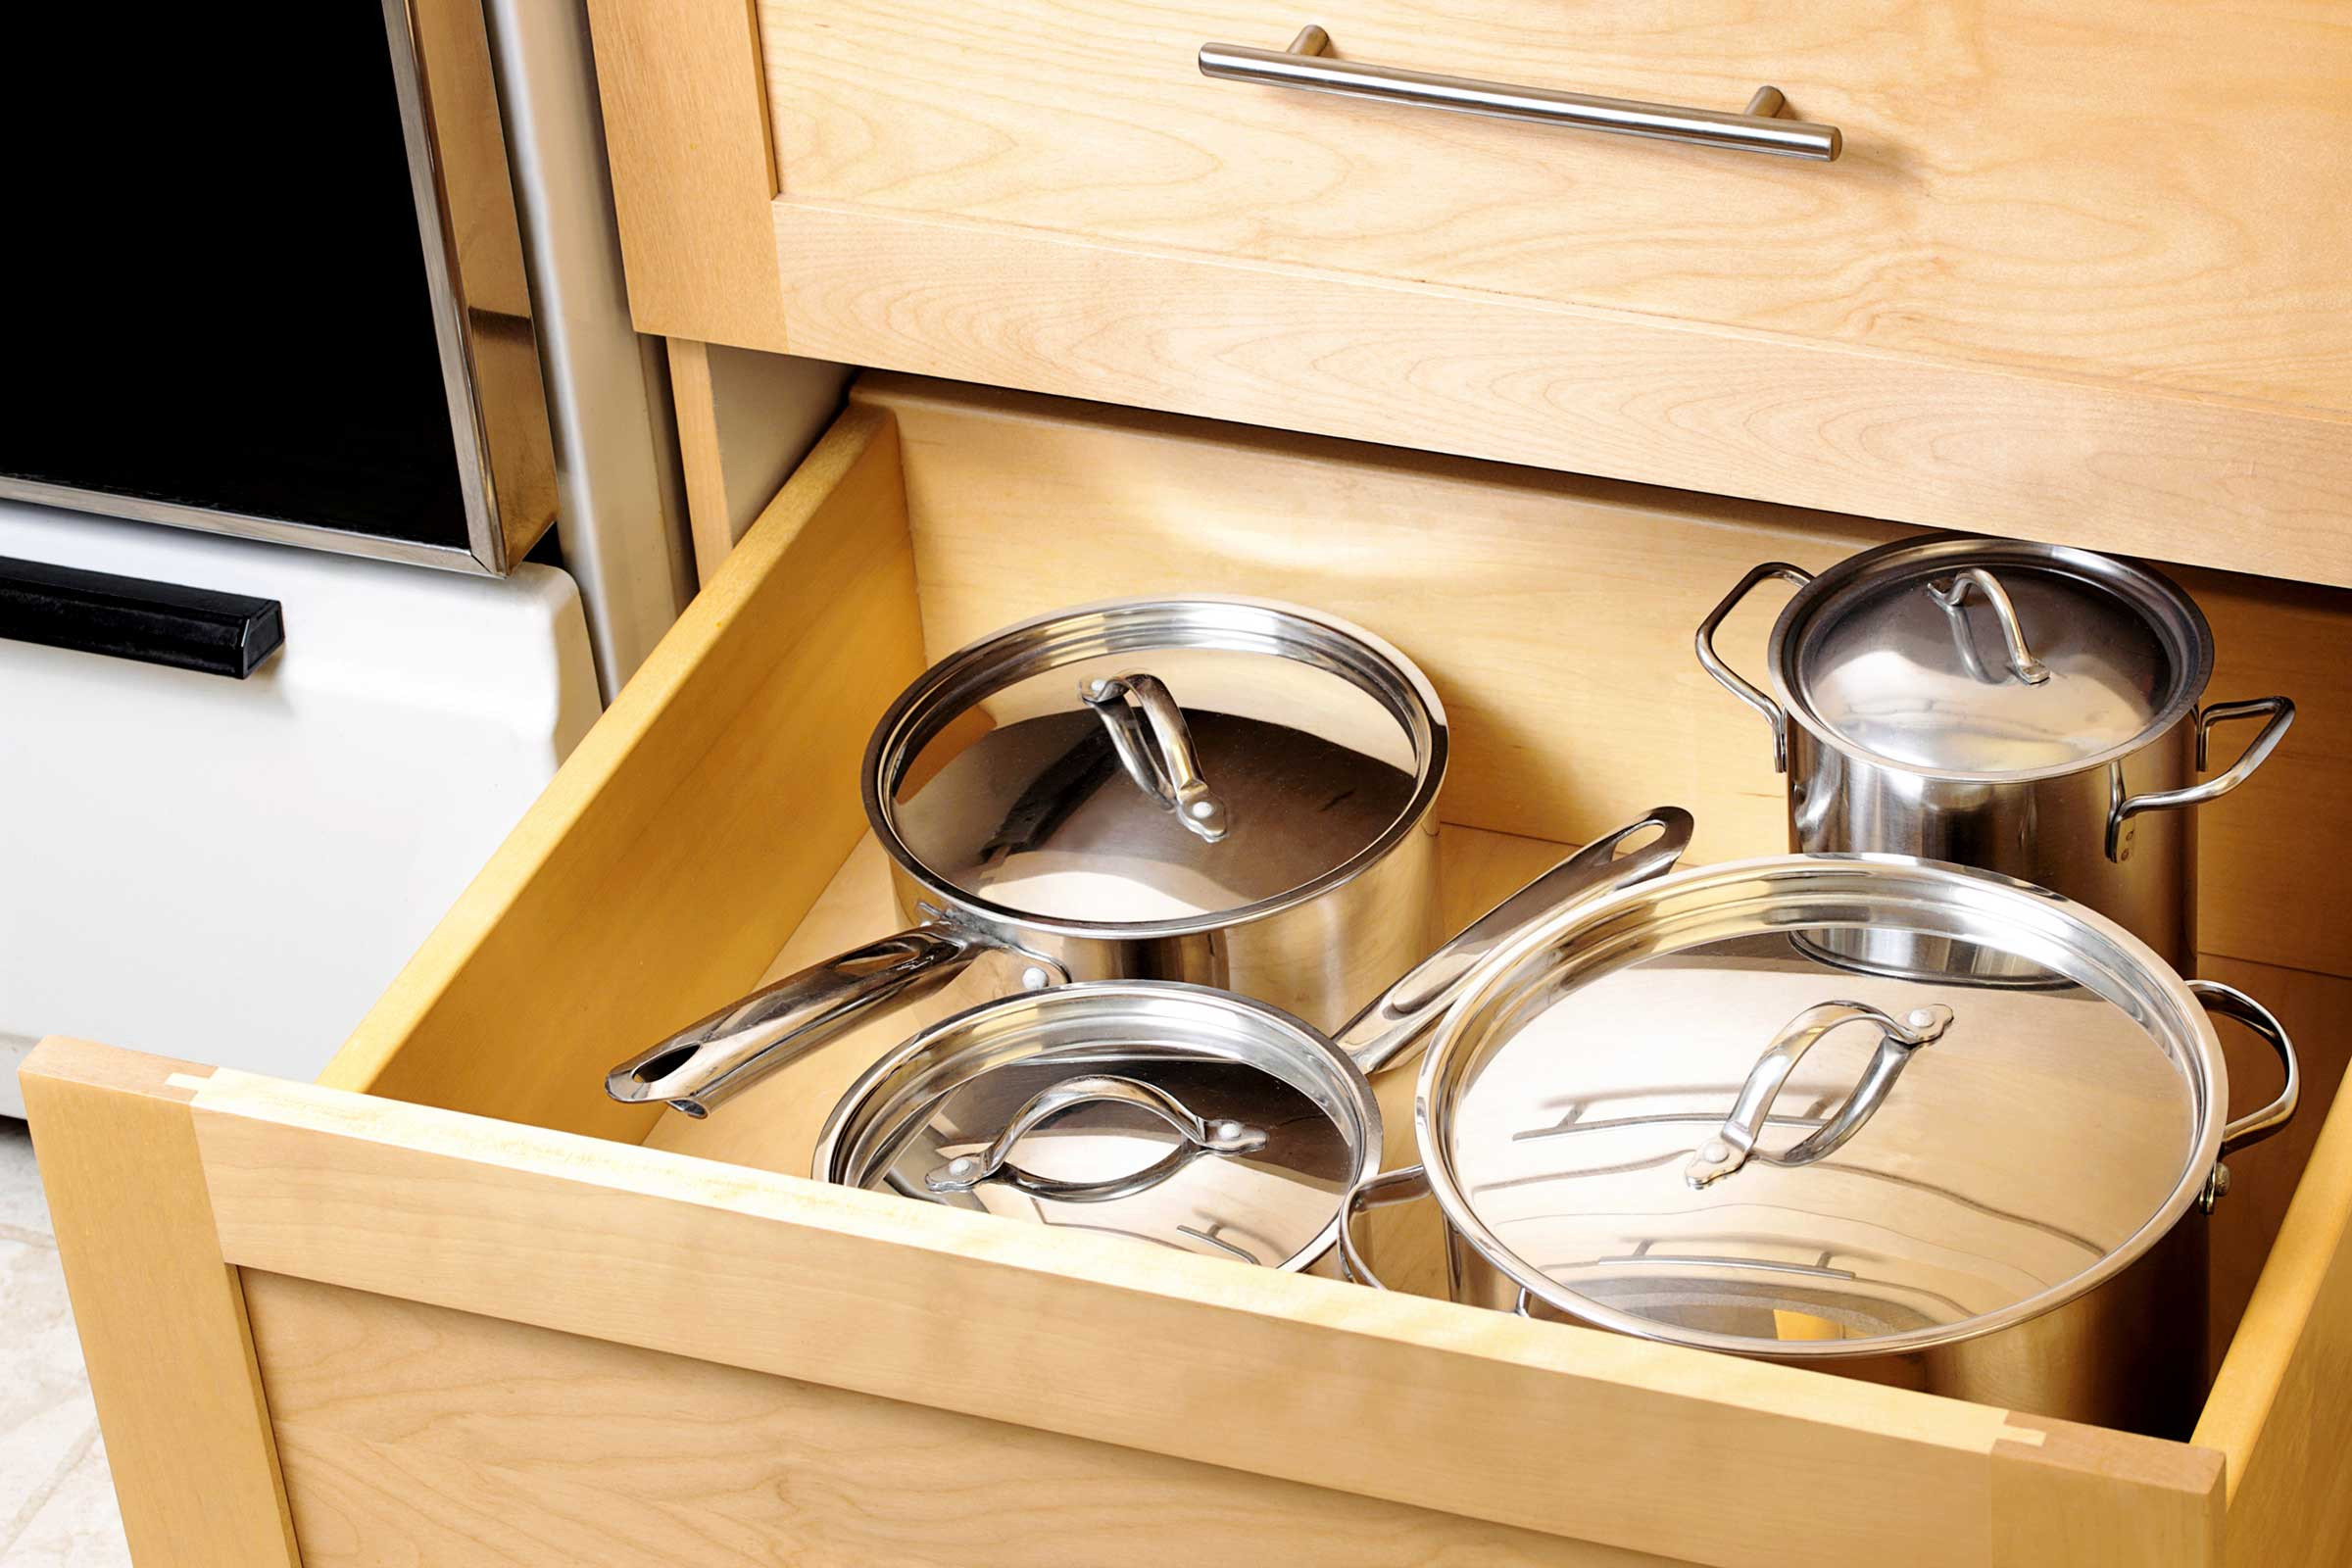 Kitchen Pots And Pan Organizer
 How to Organize Pots and Pans